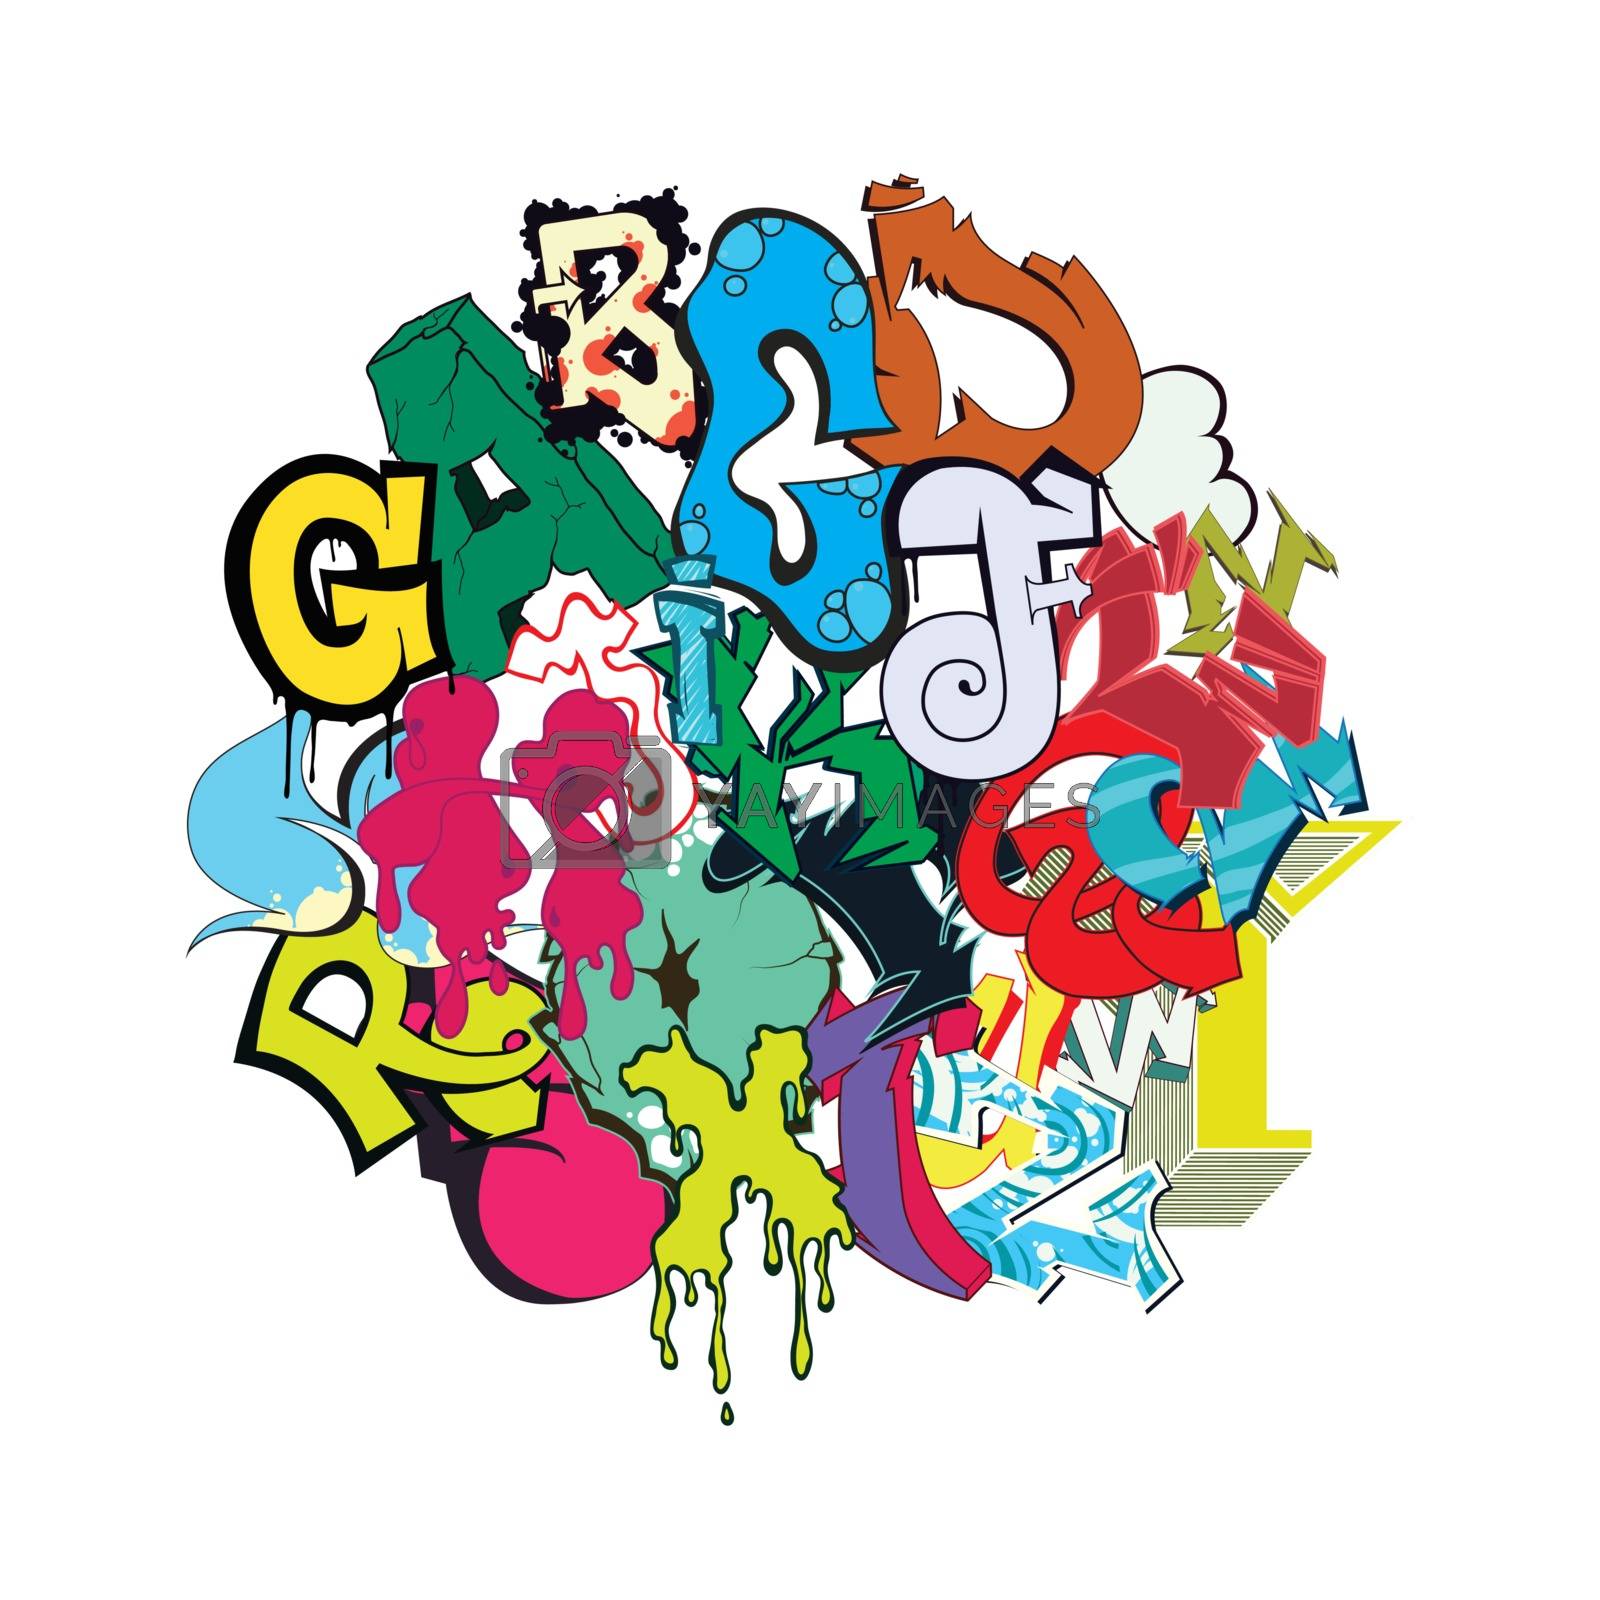 Royalty free image of Graffiti font color composition by Vanzyst